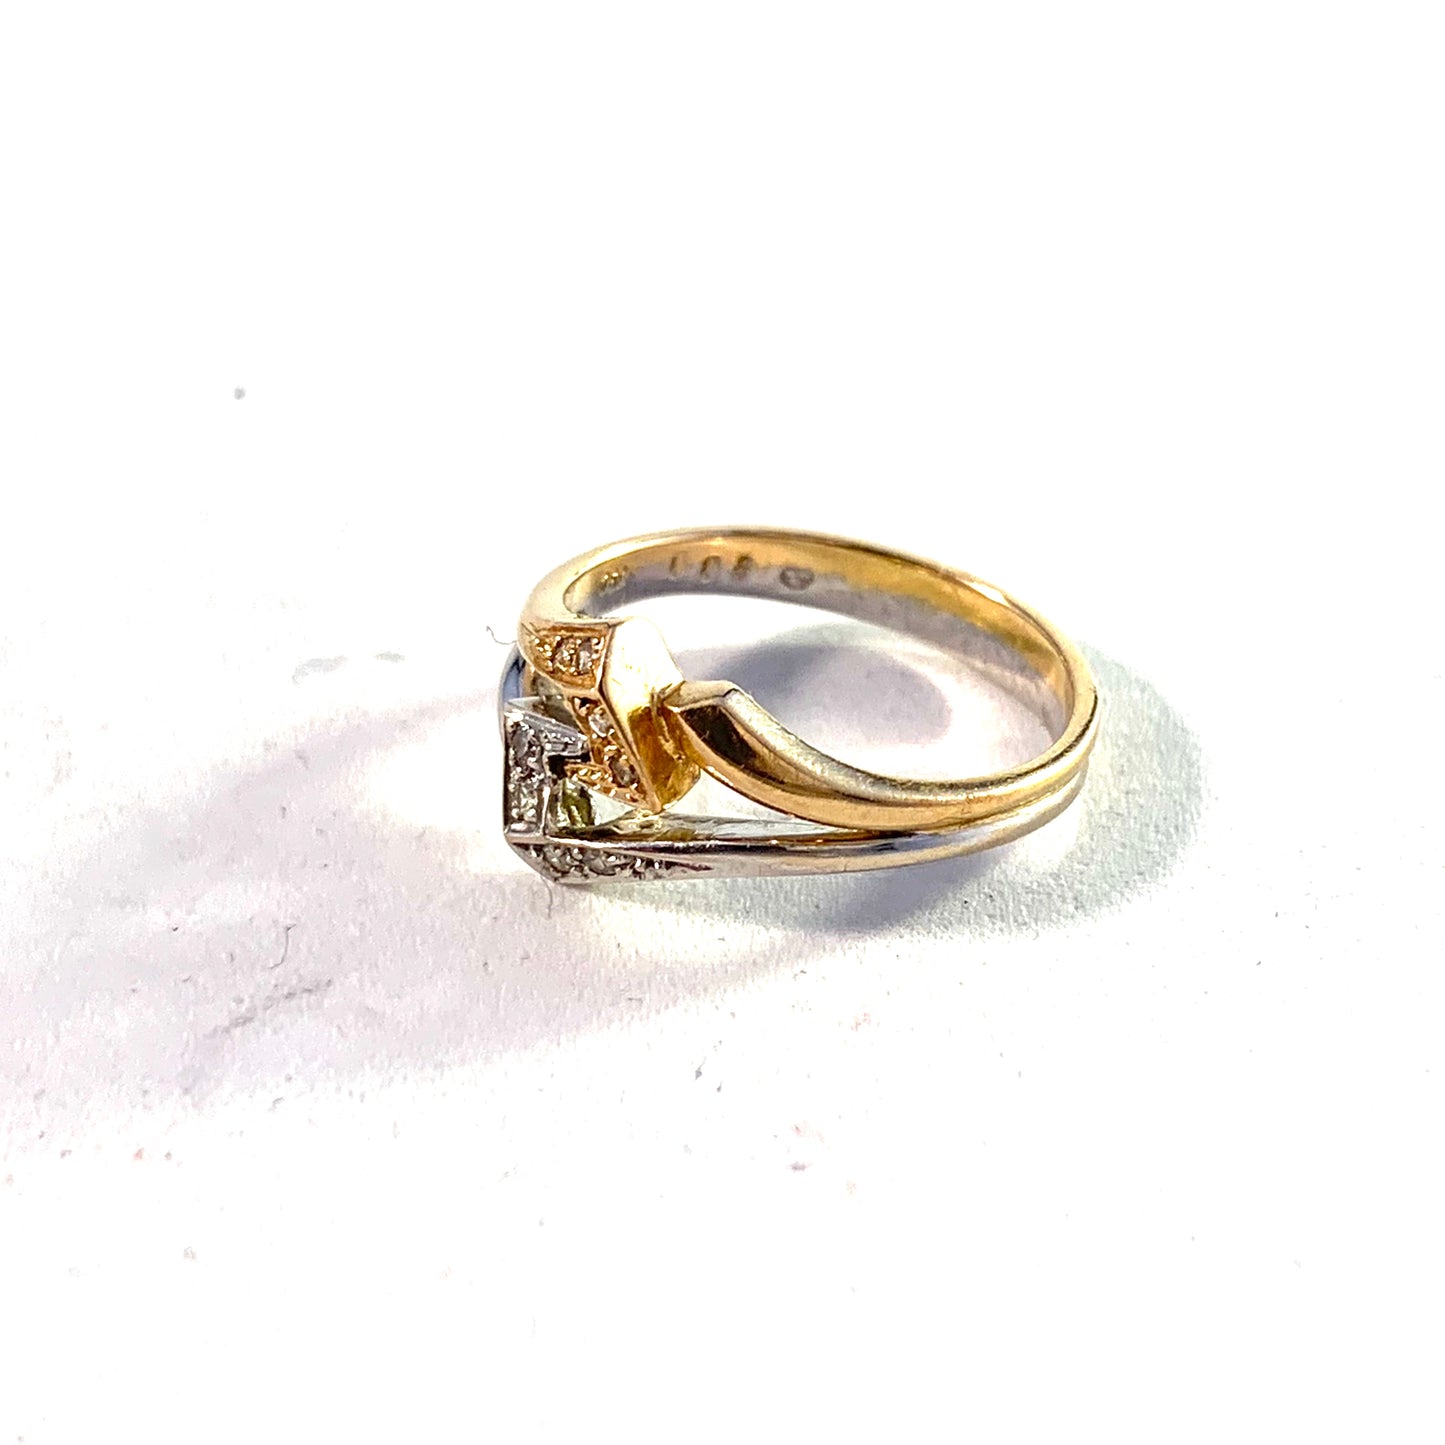 Sweden 1980s Vintage 18k White and Yellow Gold Diamond Ring.